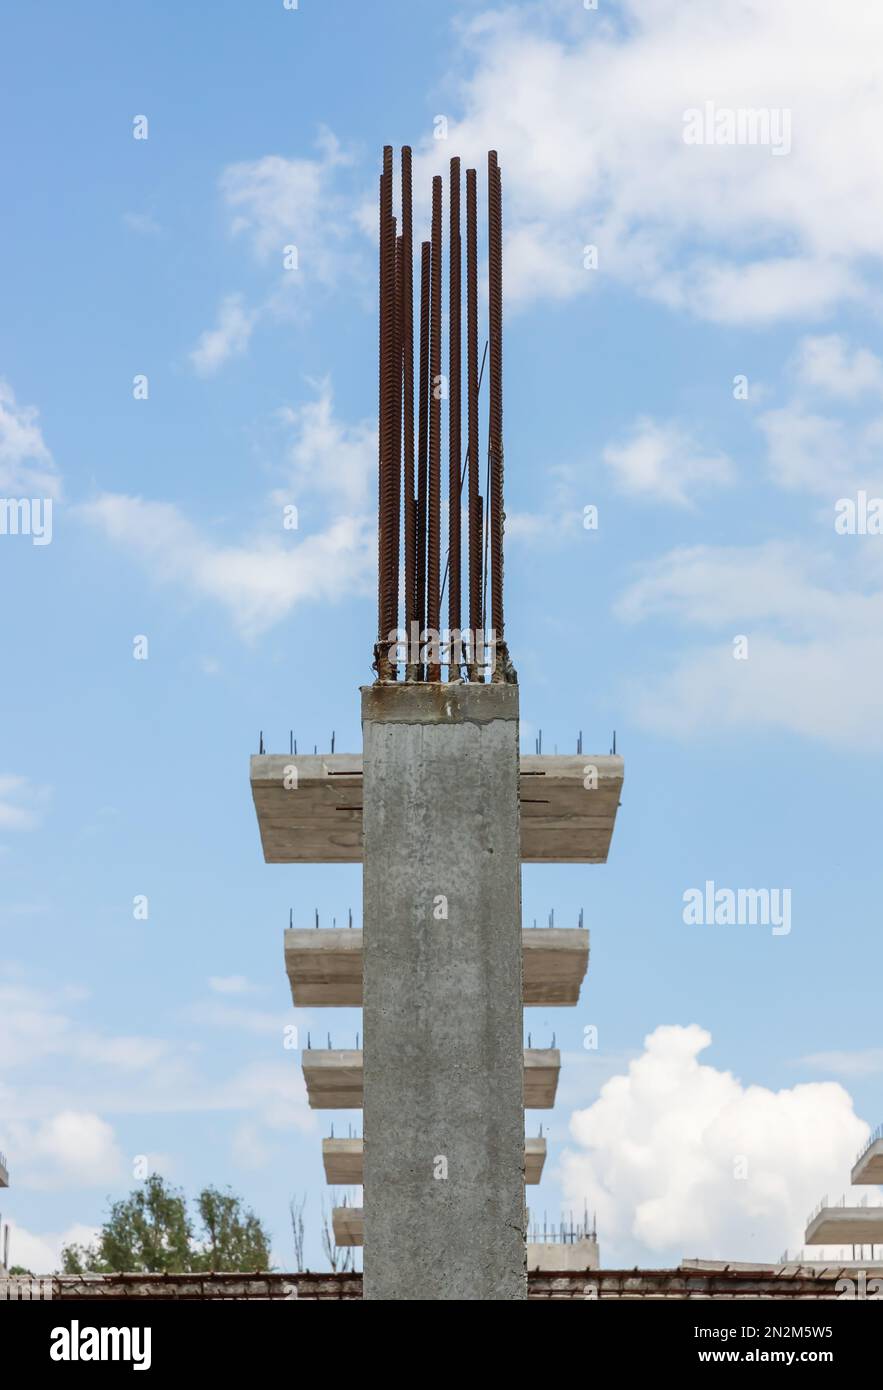 construction of reinforced concrete structures Stock Photo